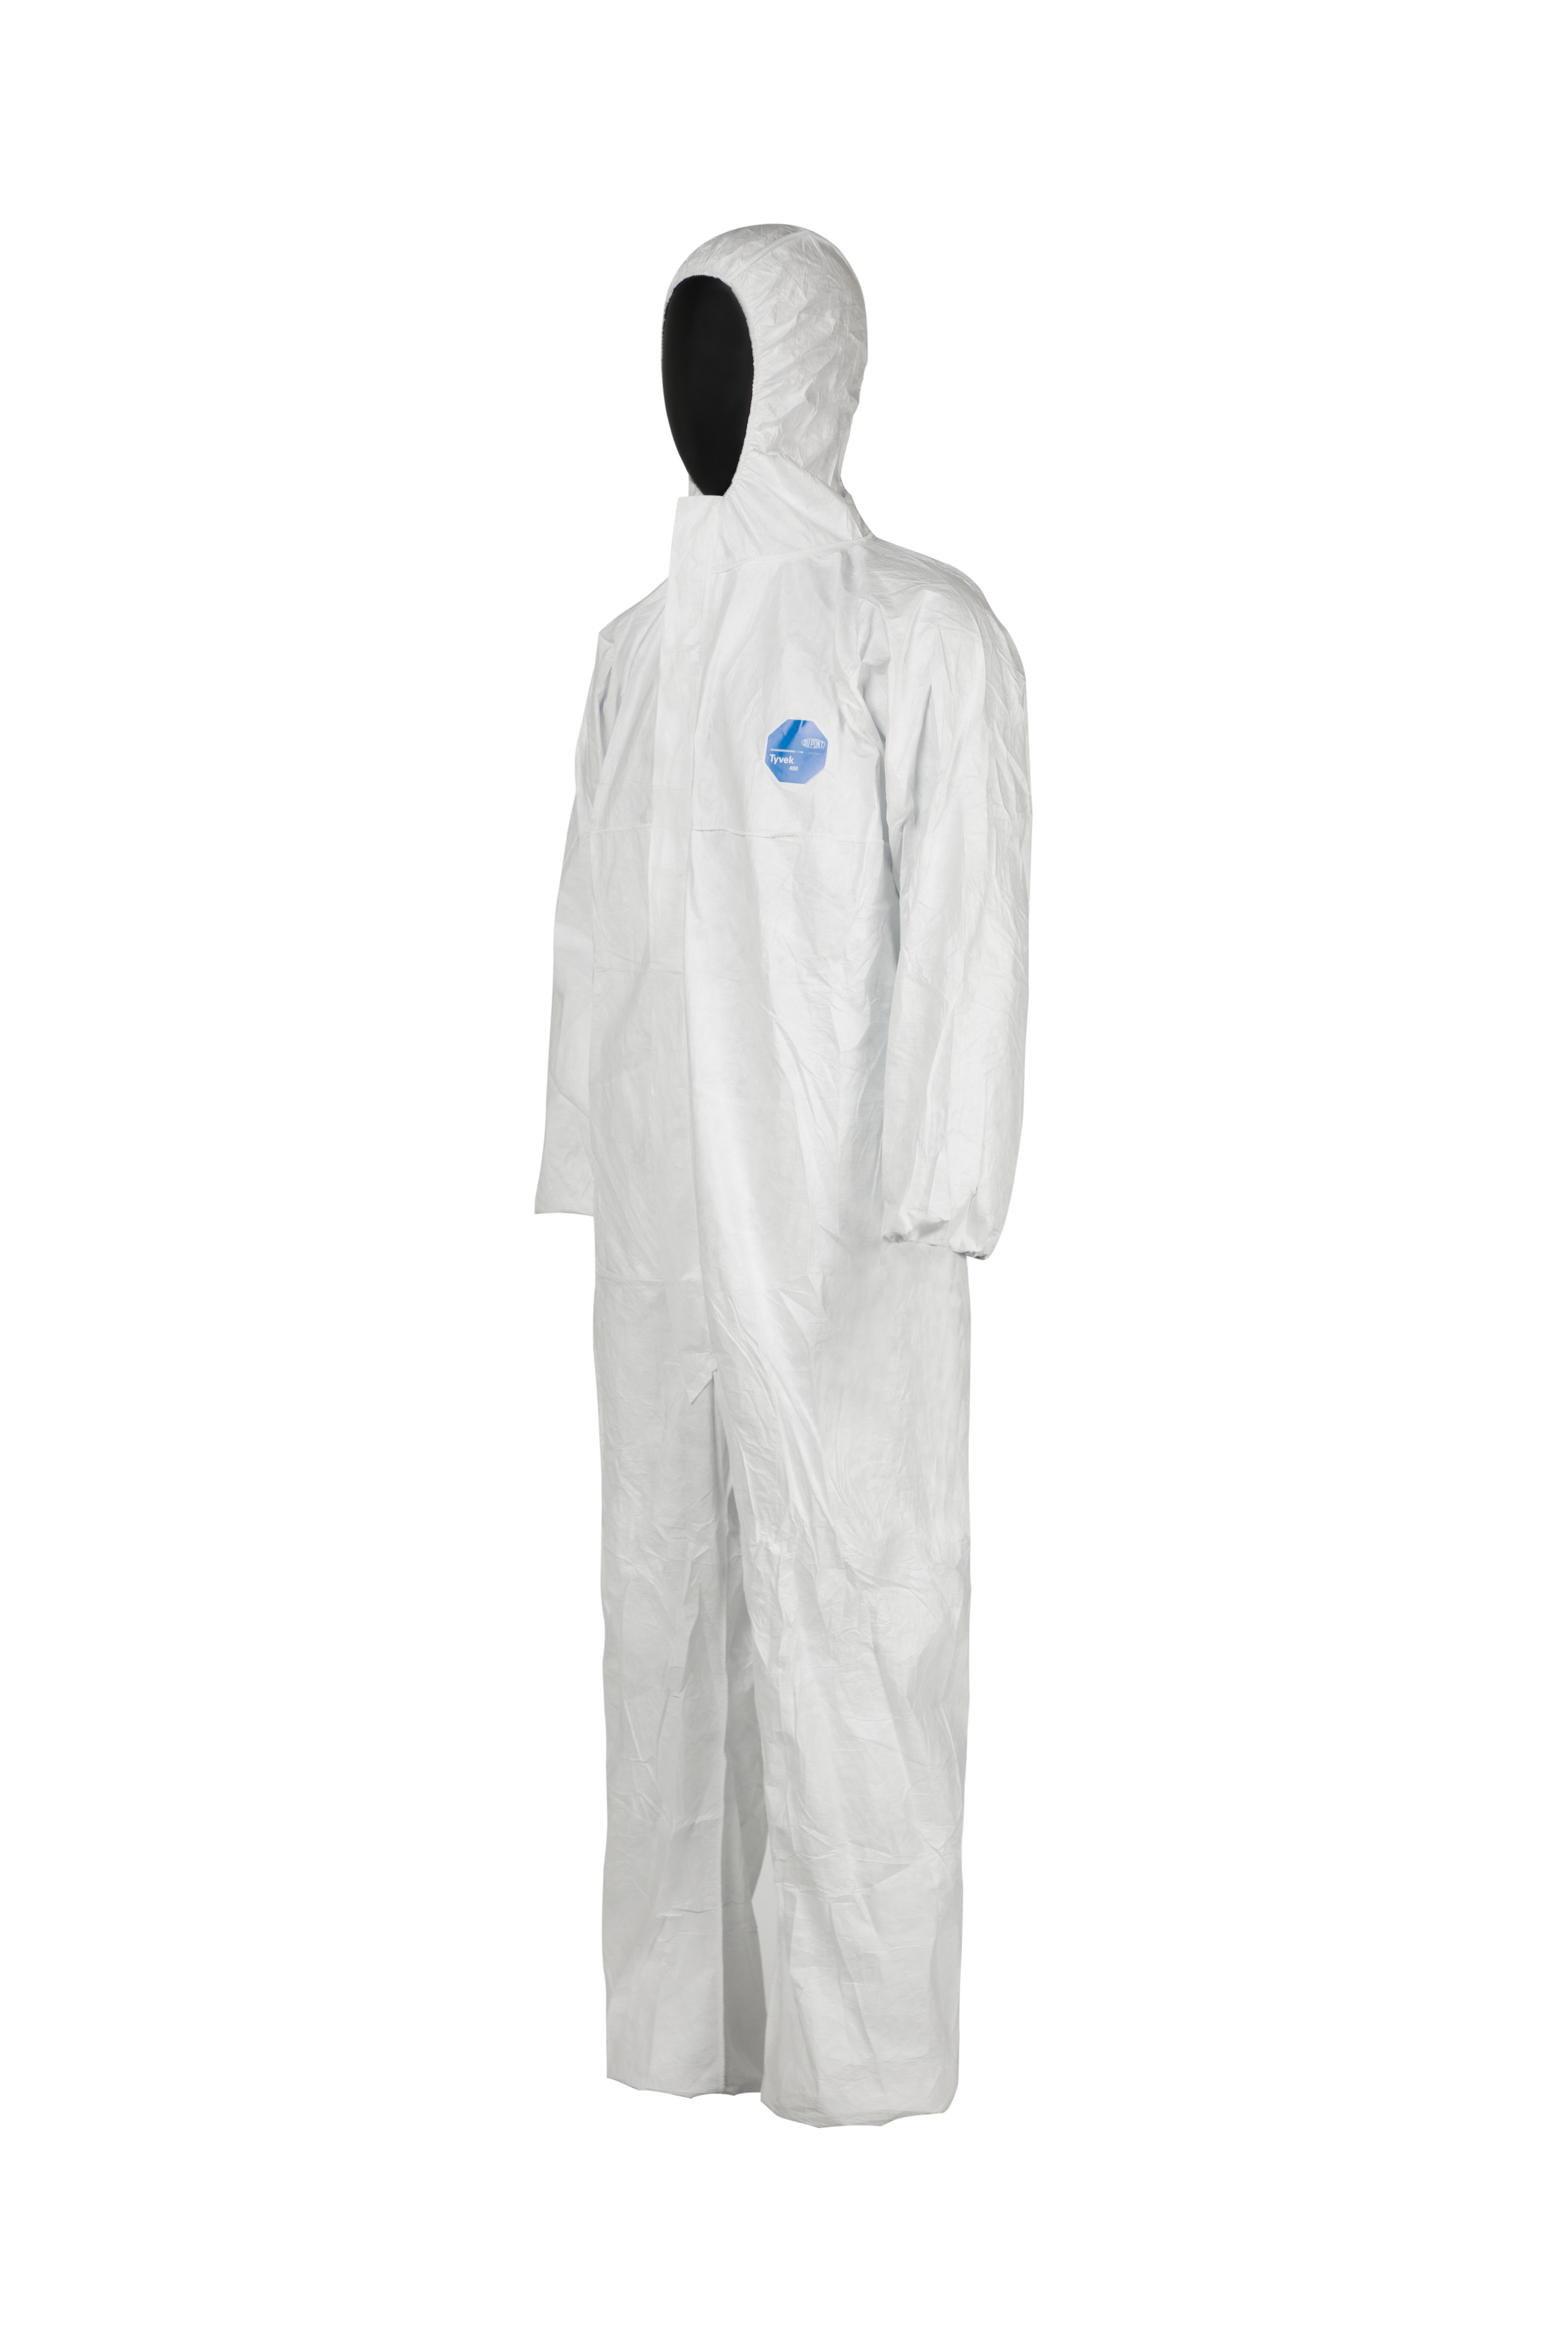 DUPONT Hooded Disposable Coveralls, White, Tyvek(R) 400, zipper – Kyrios  Soter Scientific